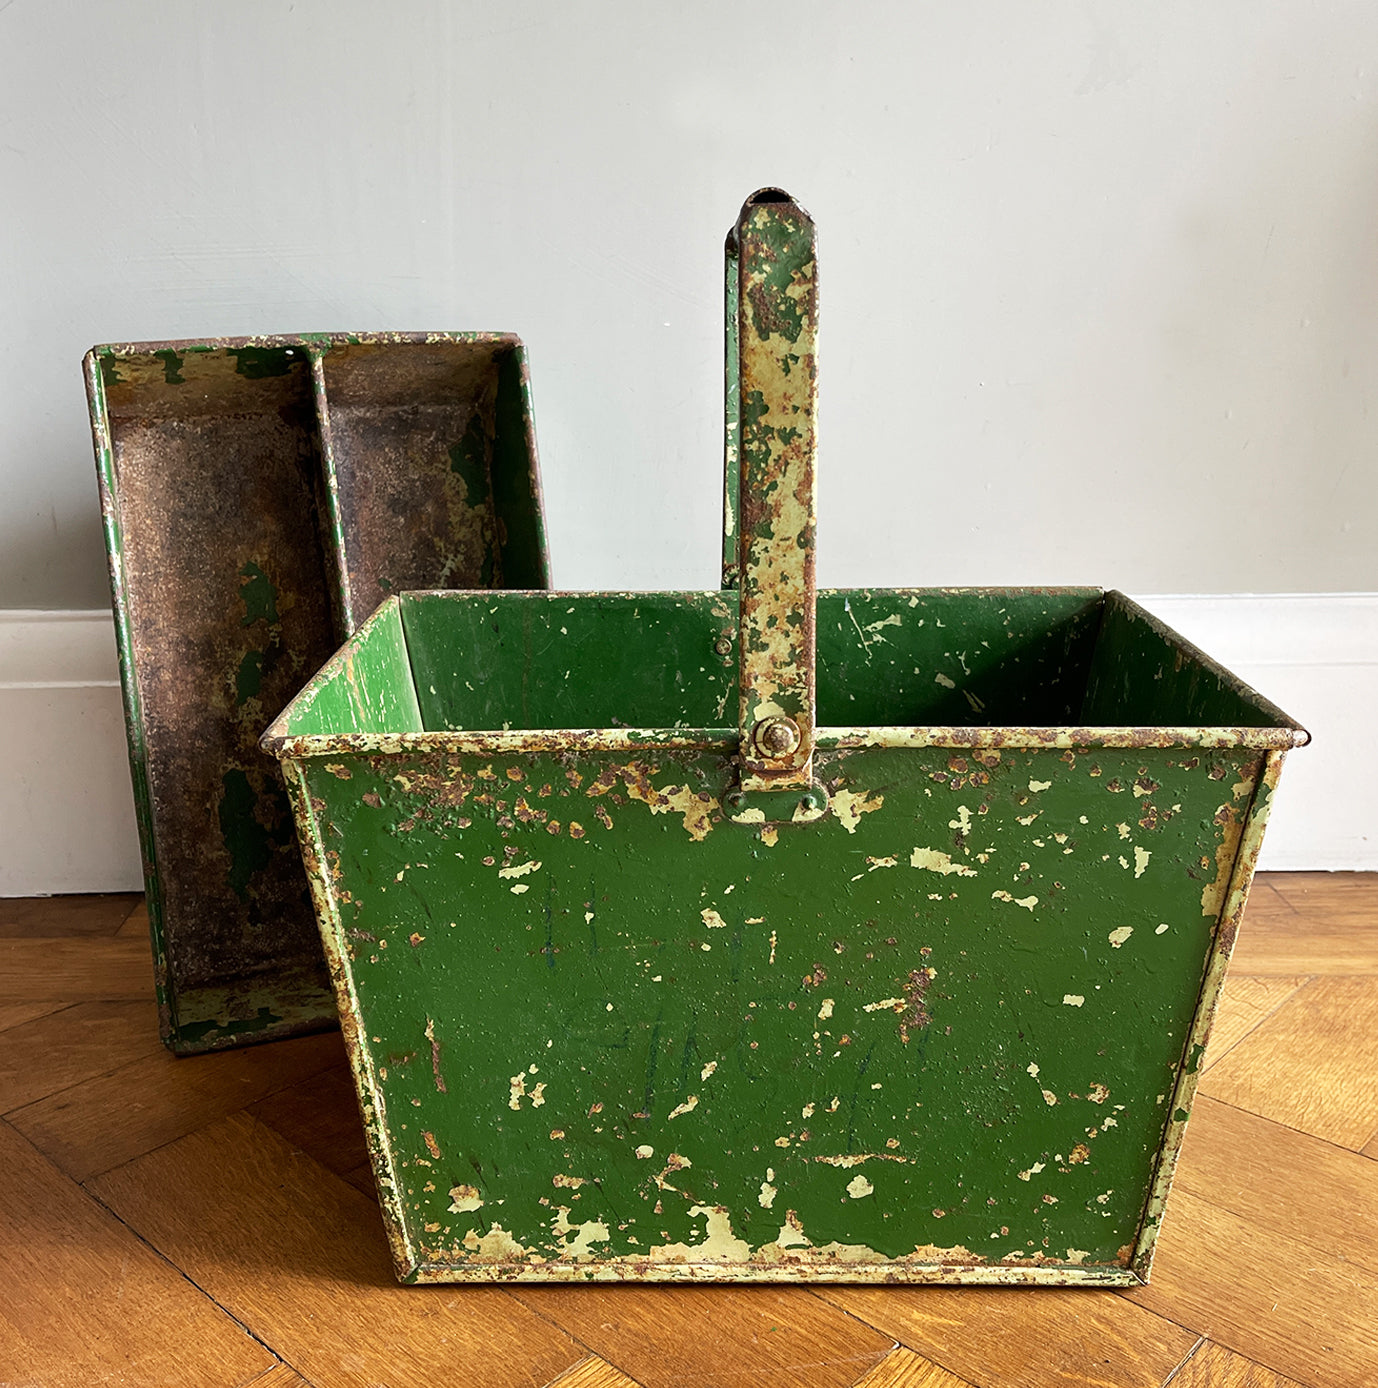 A superb double layered Industrial Trug with super chippy green paint. The tray that nestles in to the top area has two handy compartments for smaller items leaving the below space for larger items. Super sturdy and practical - SHOP NOW - www.intovintage.co.uk